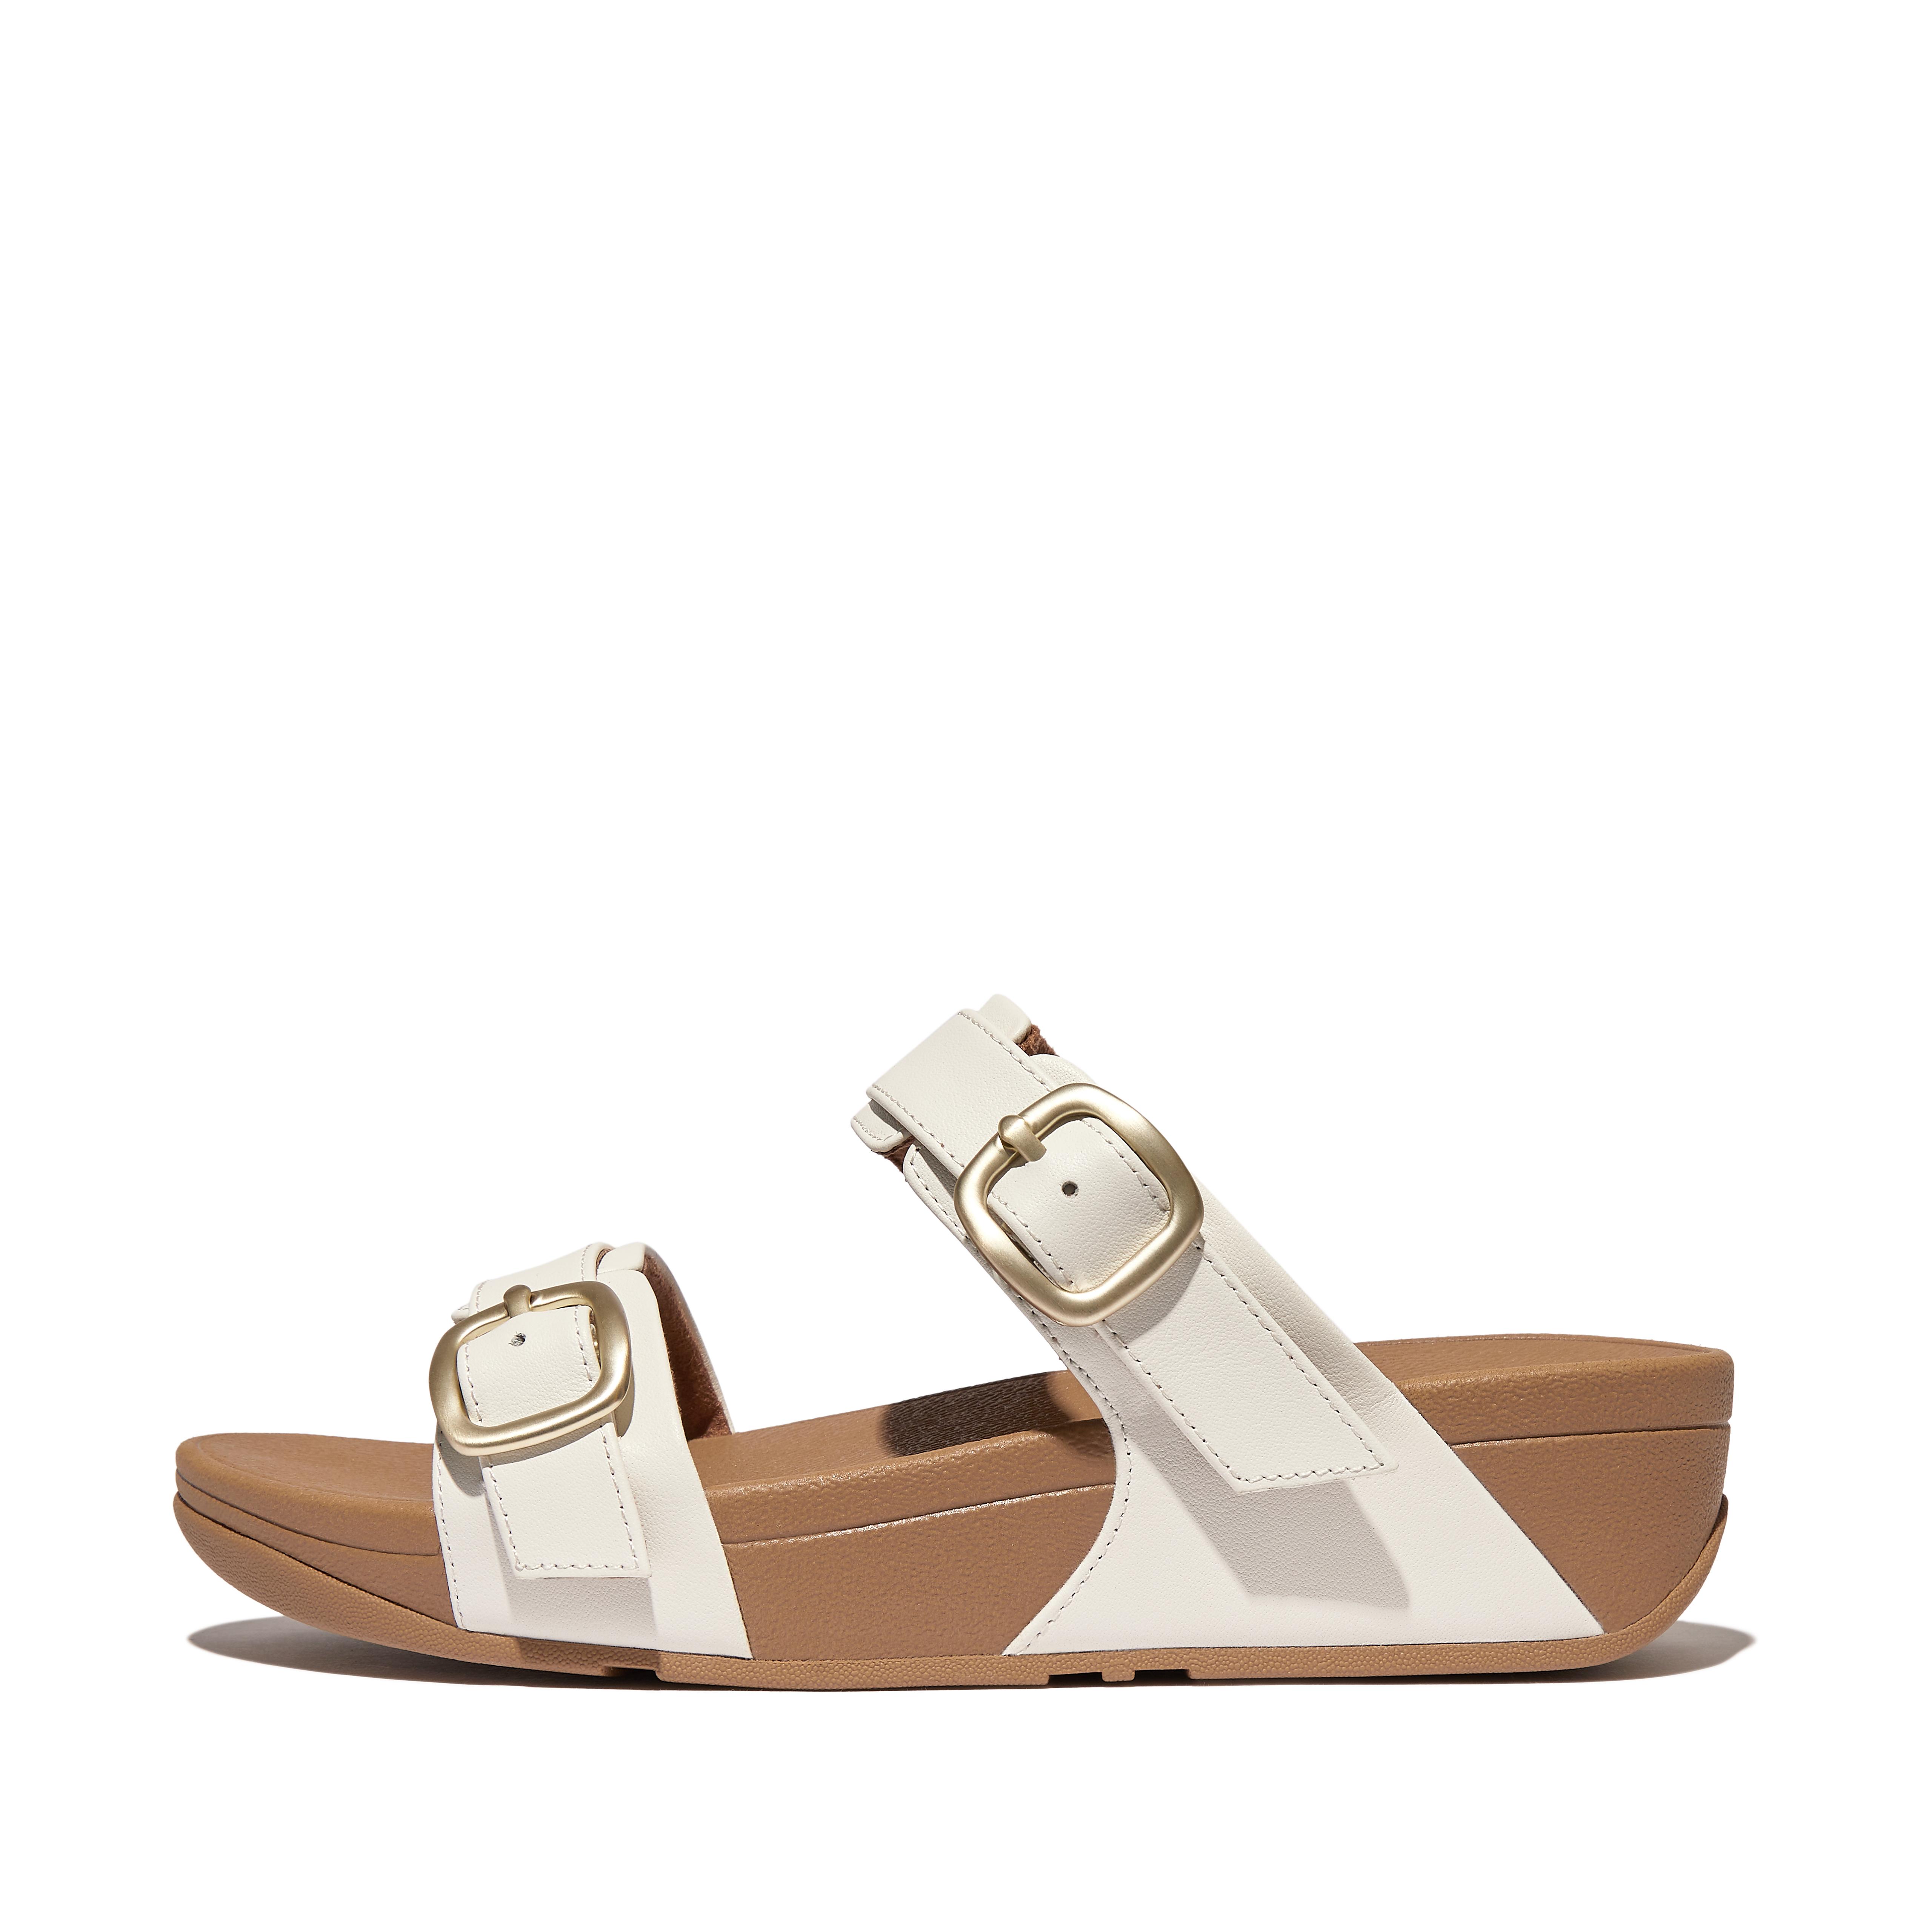 Fitflop Adjustable-Buckle Leather Slides,Urban White